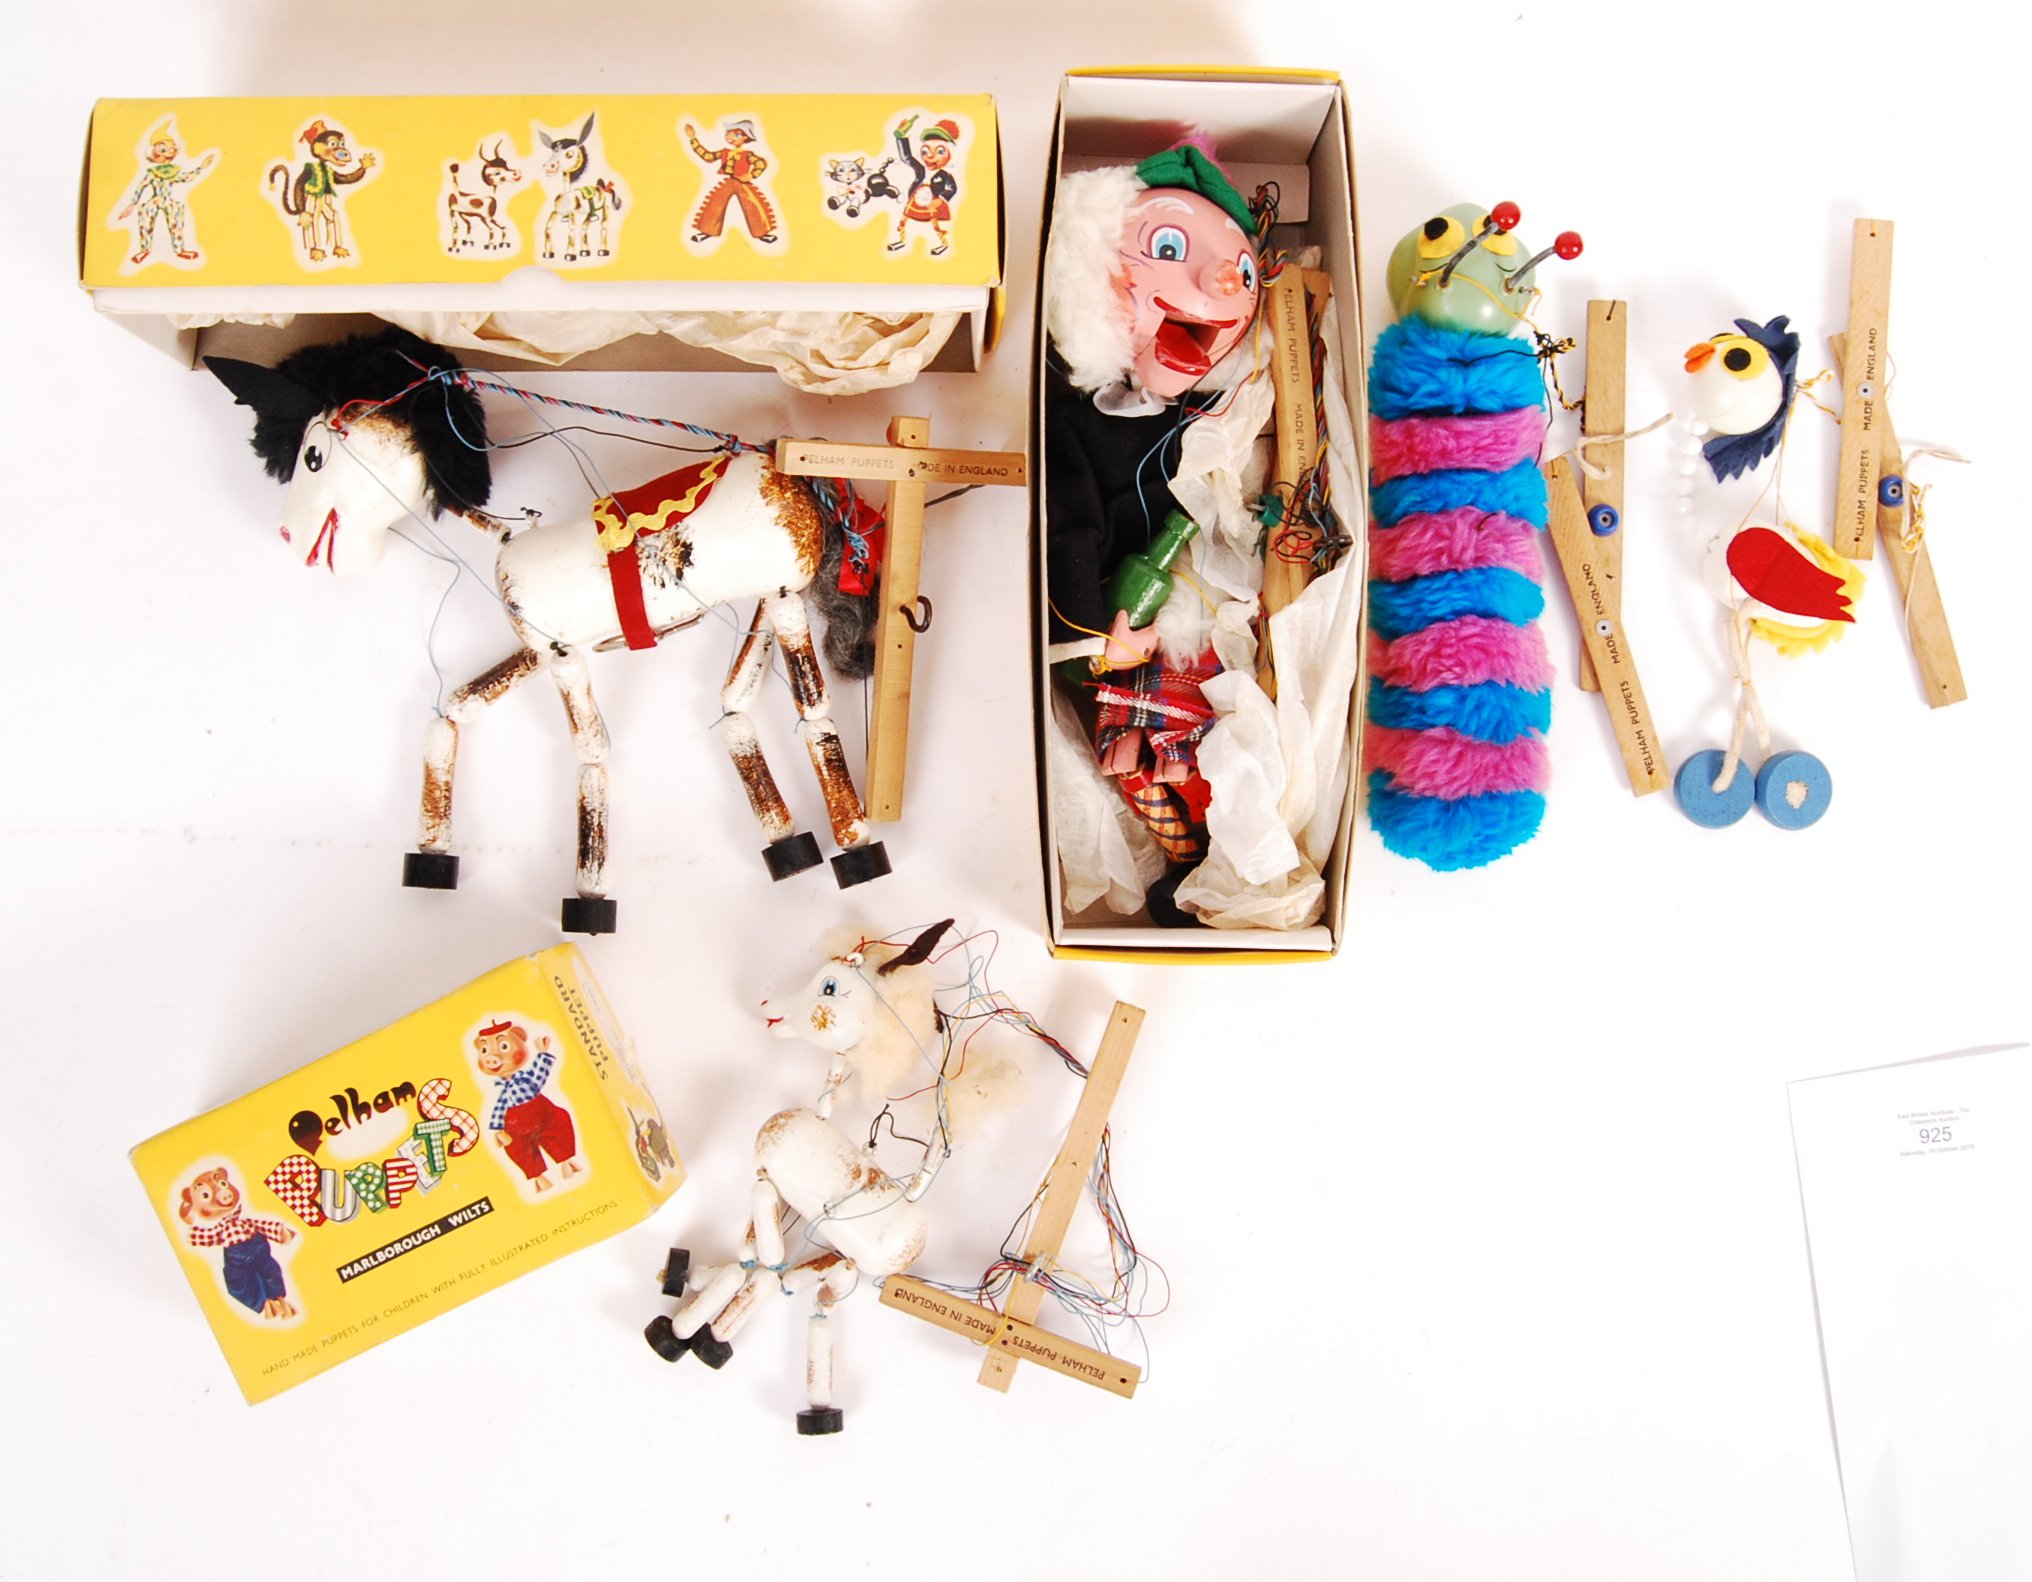 ORIGINAL VINTAGE BOXED AND LOOSE PELHAM PUPPETS